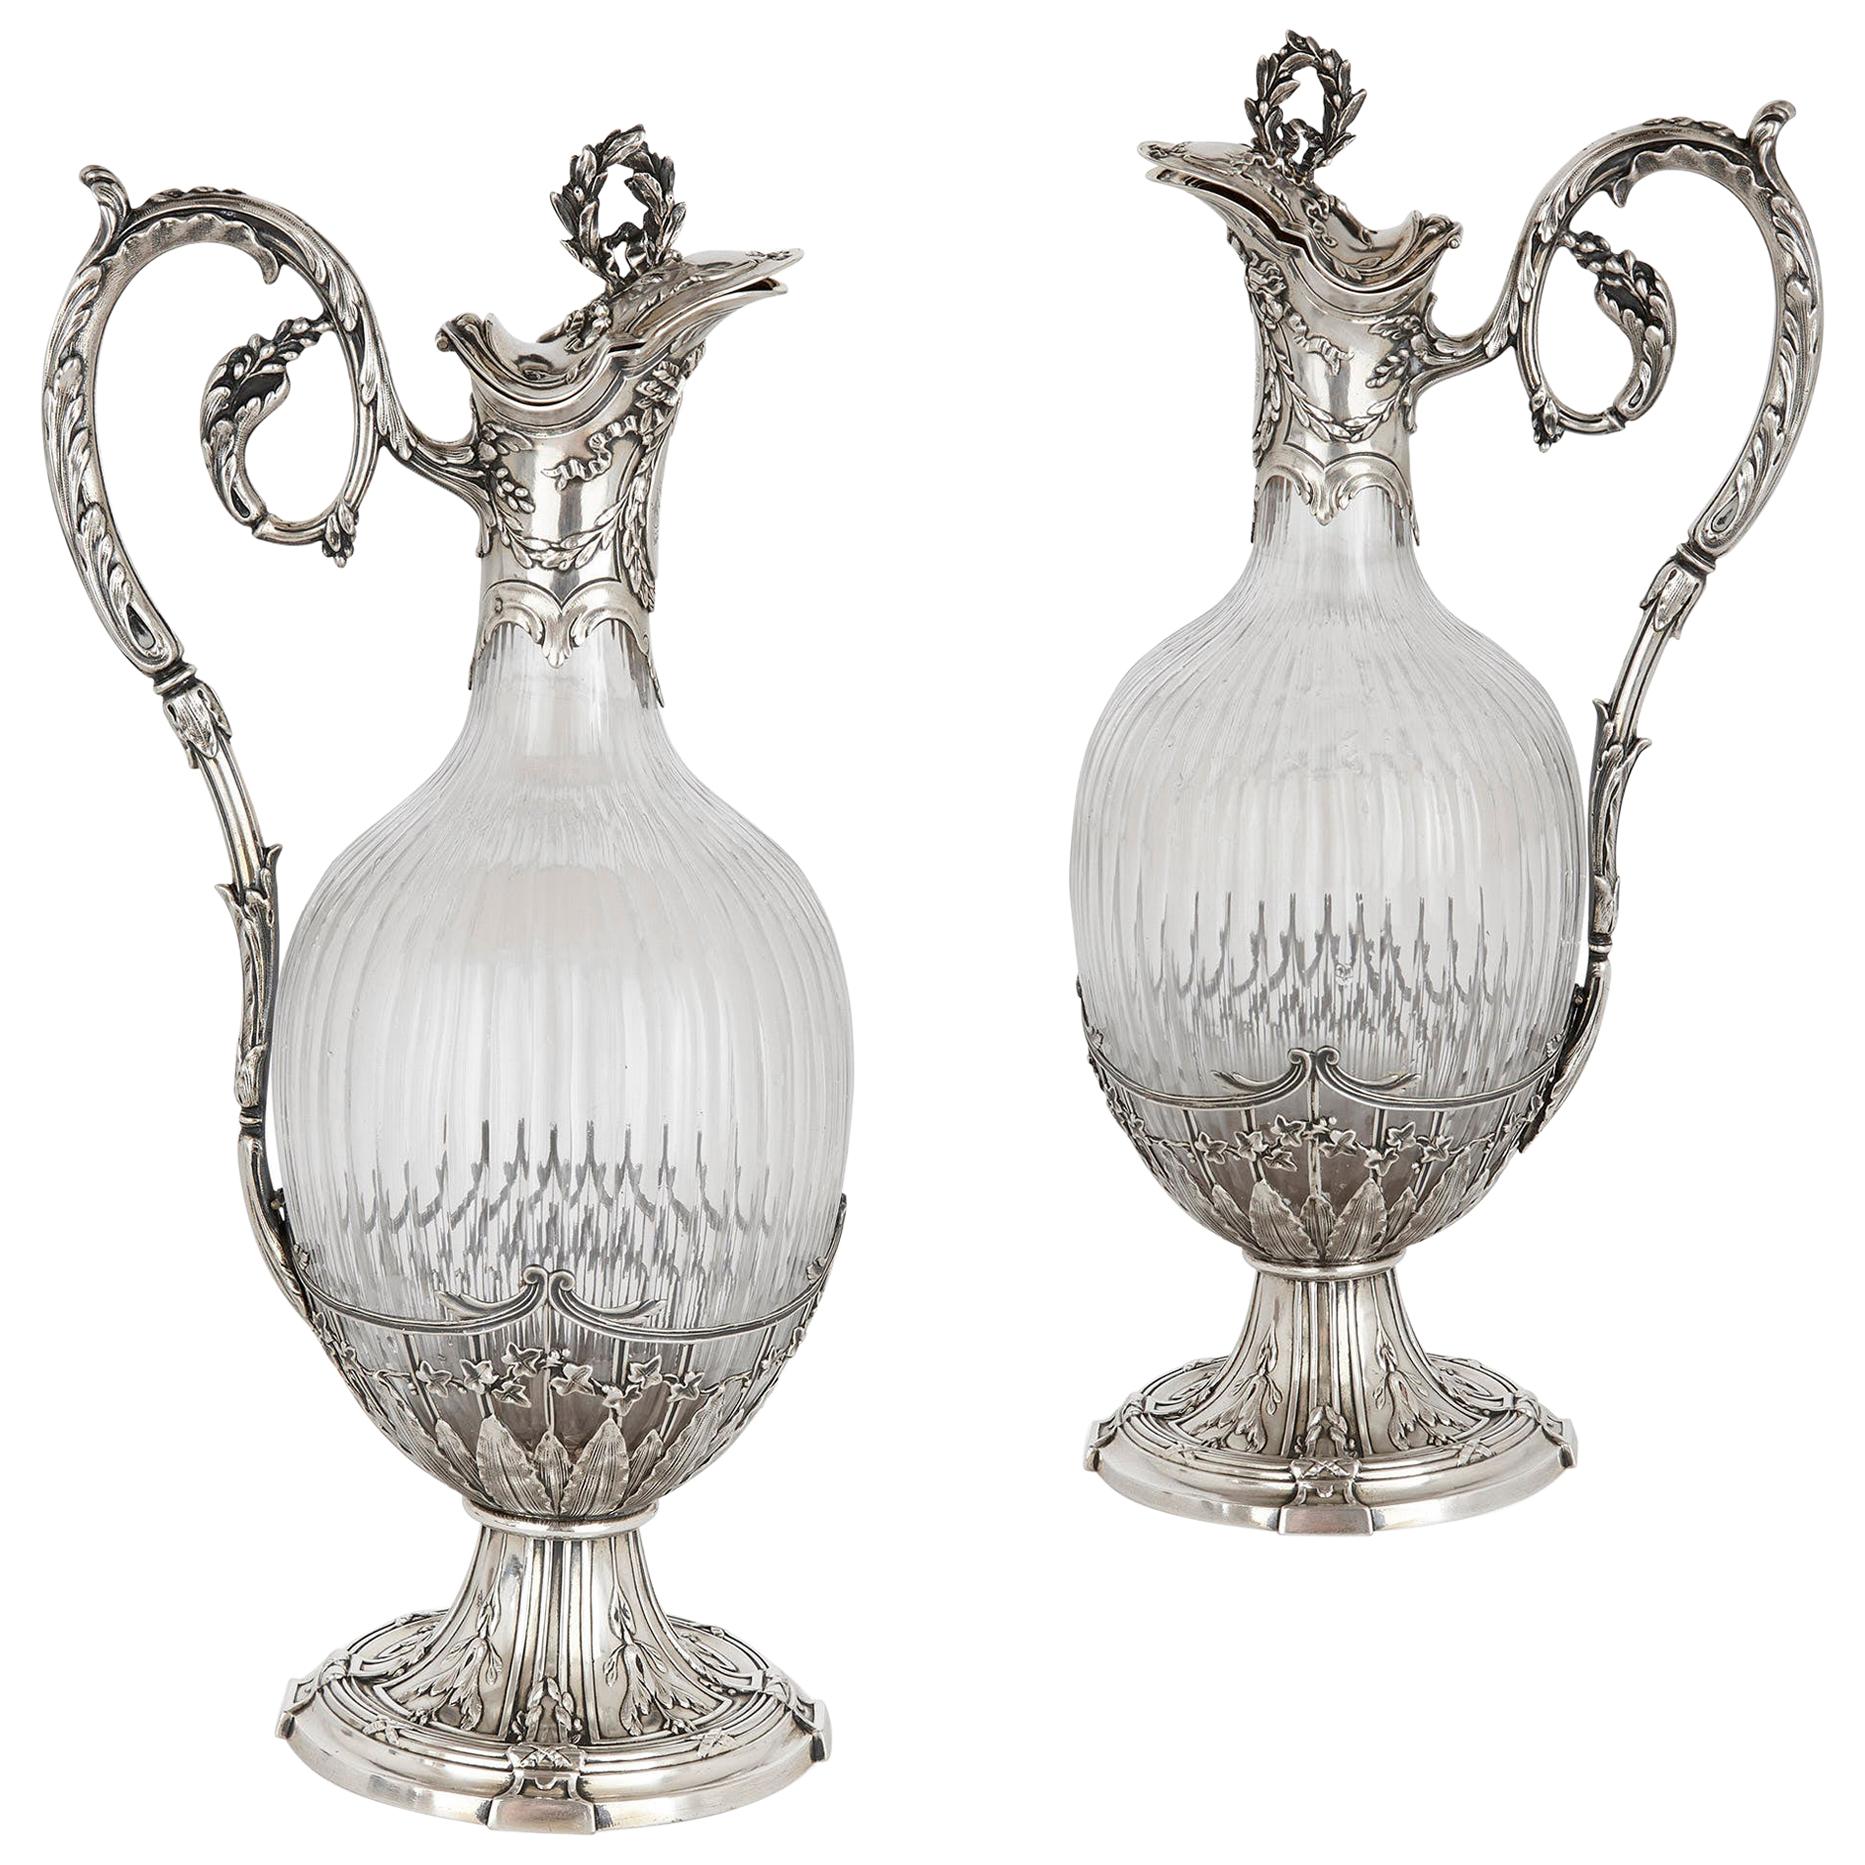 Pair of Rococo Style Silver Mounted Crystal Claret Jugs by Boivin